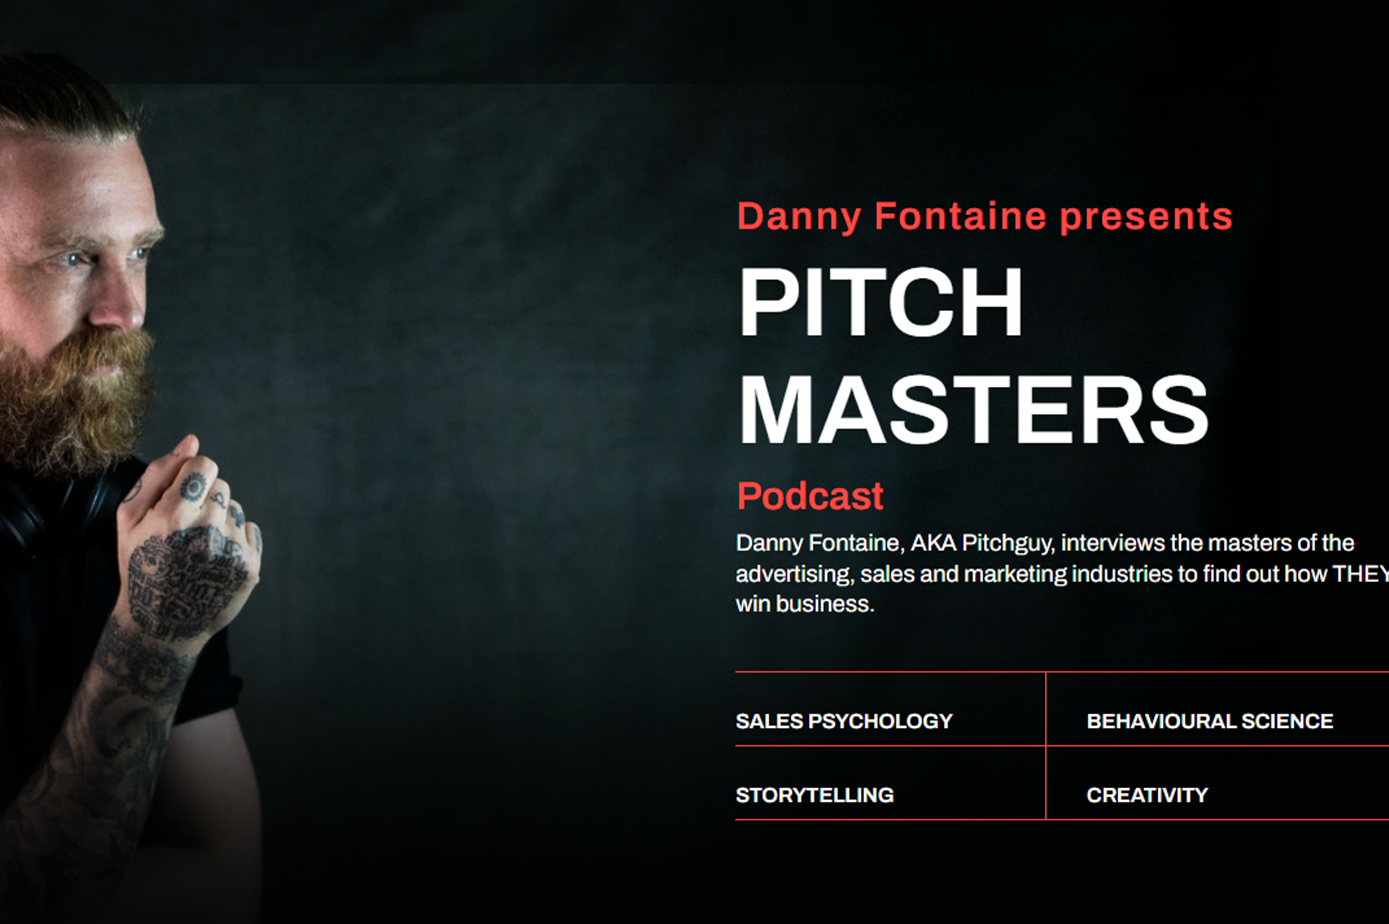 Image of the Pitch Master series host